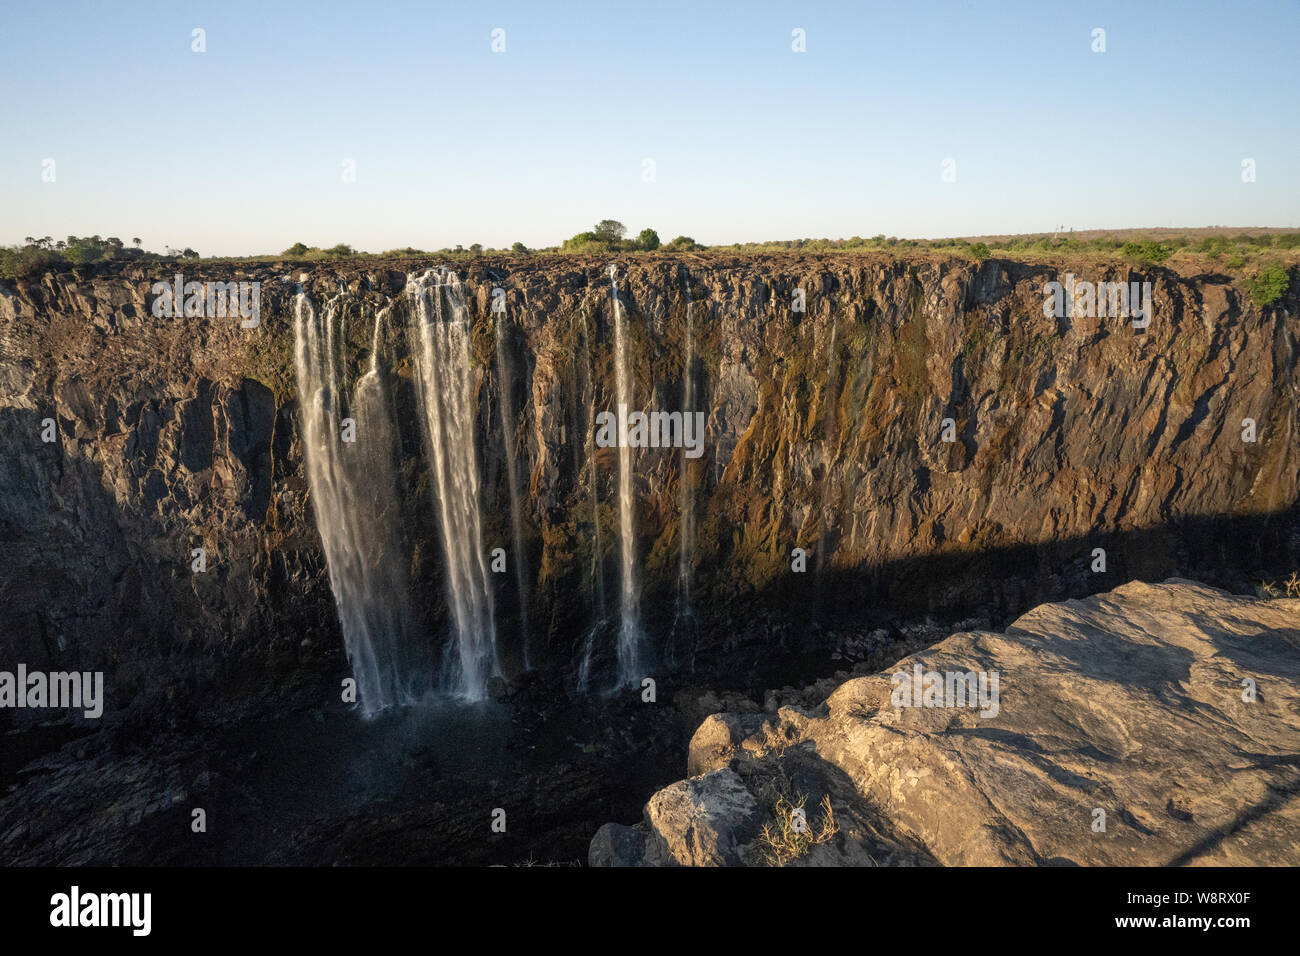 Victoria Falls, Named by David Livingstone in 1855 after Queen Victoria, The waterfall is formed by the Zambezi River falling into a 100 metre deep ch Stock Photo